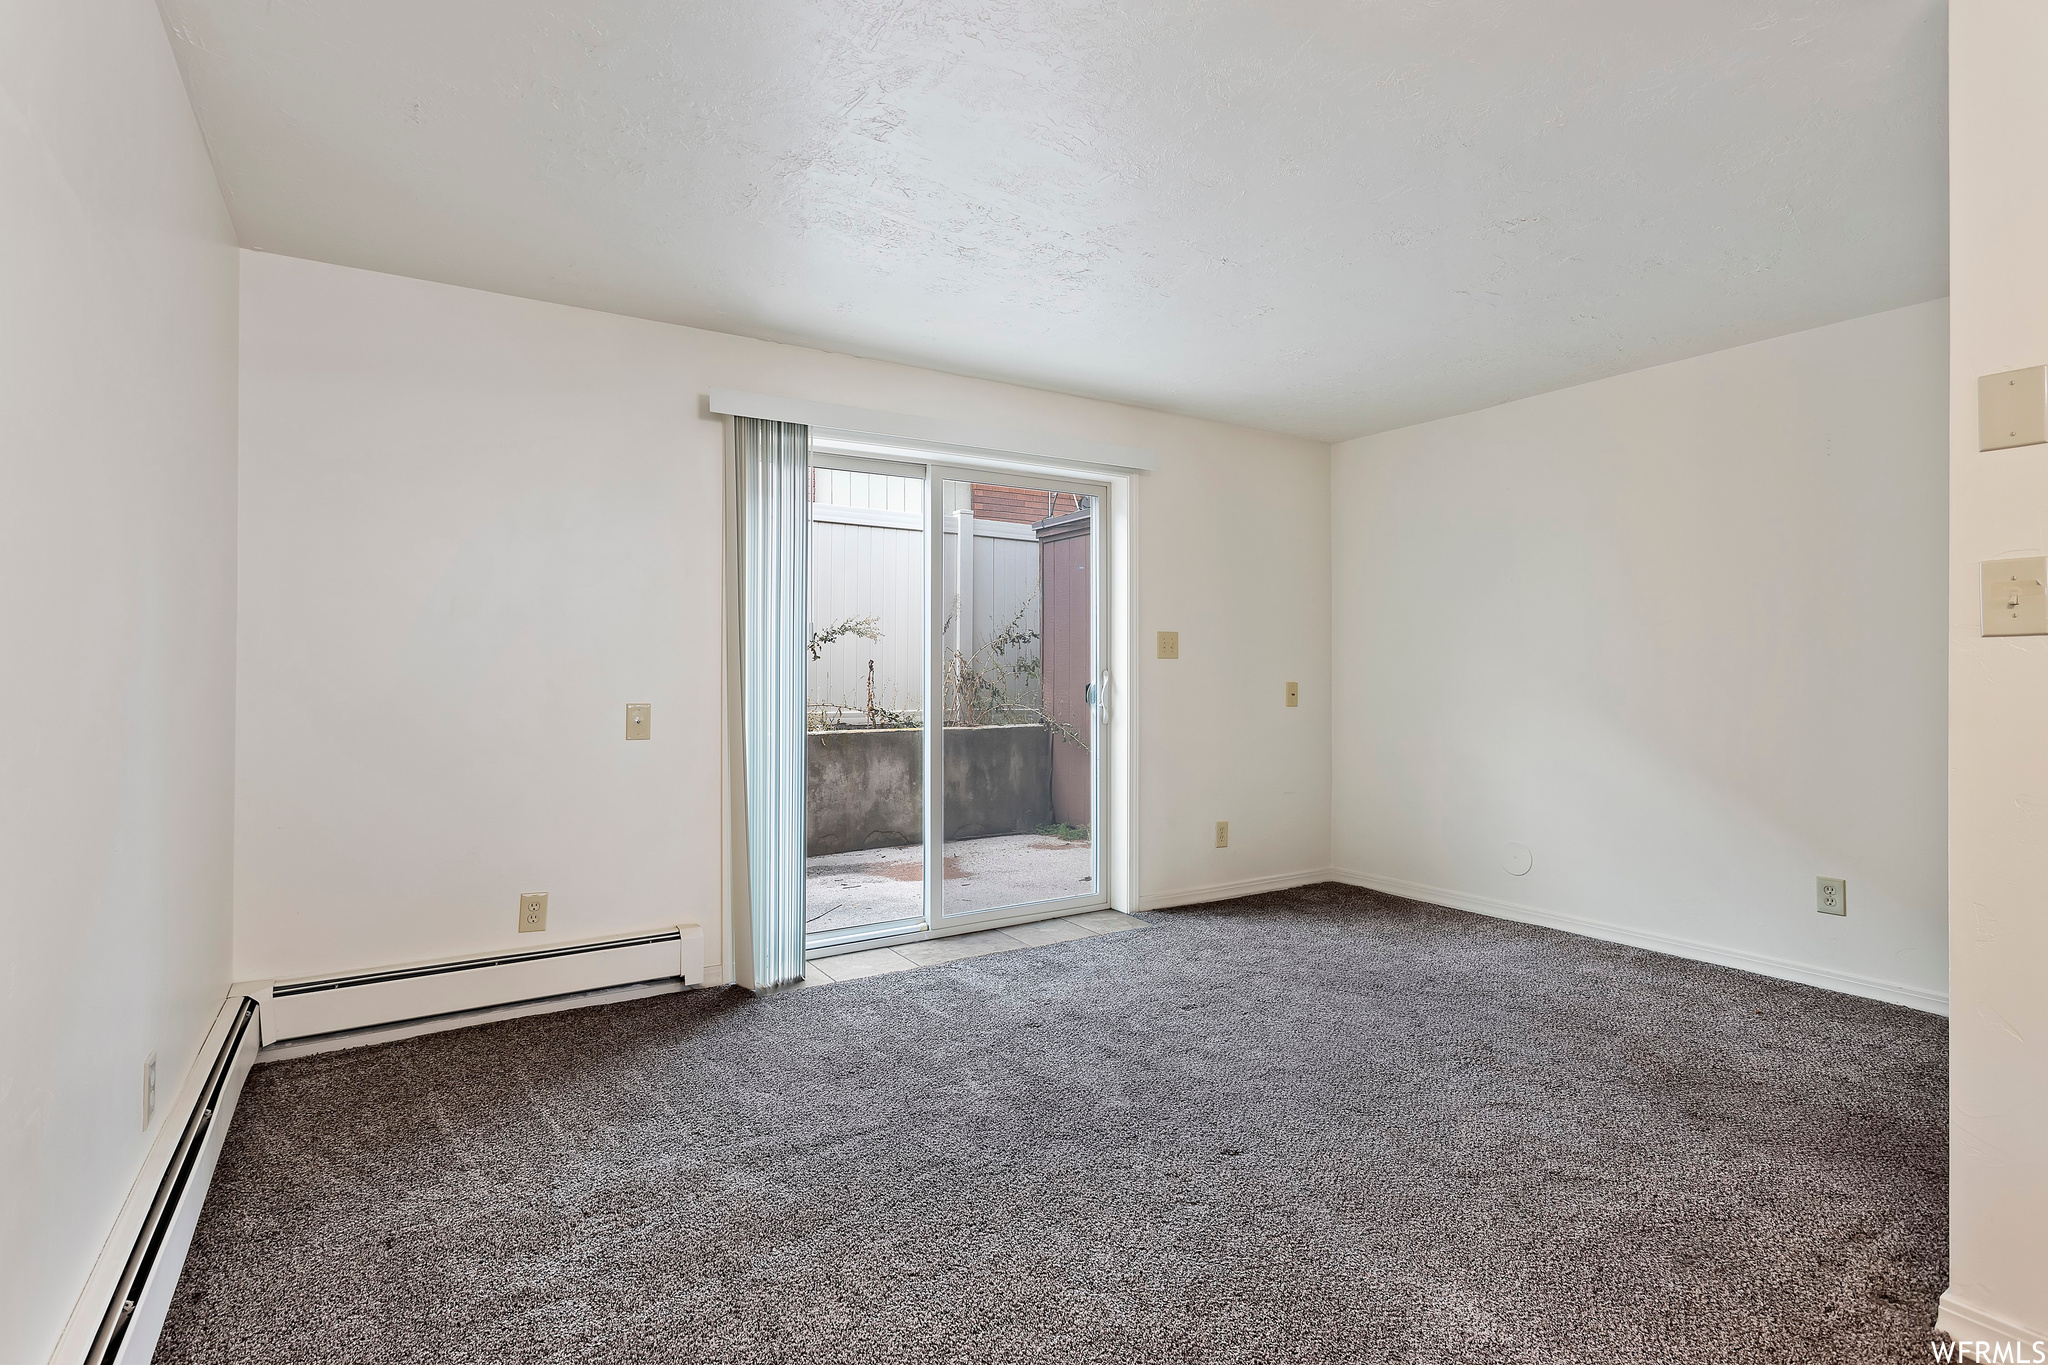 Empty room with dark colored carpet, baseboard heating, and a healthy amount of sunlight